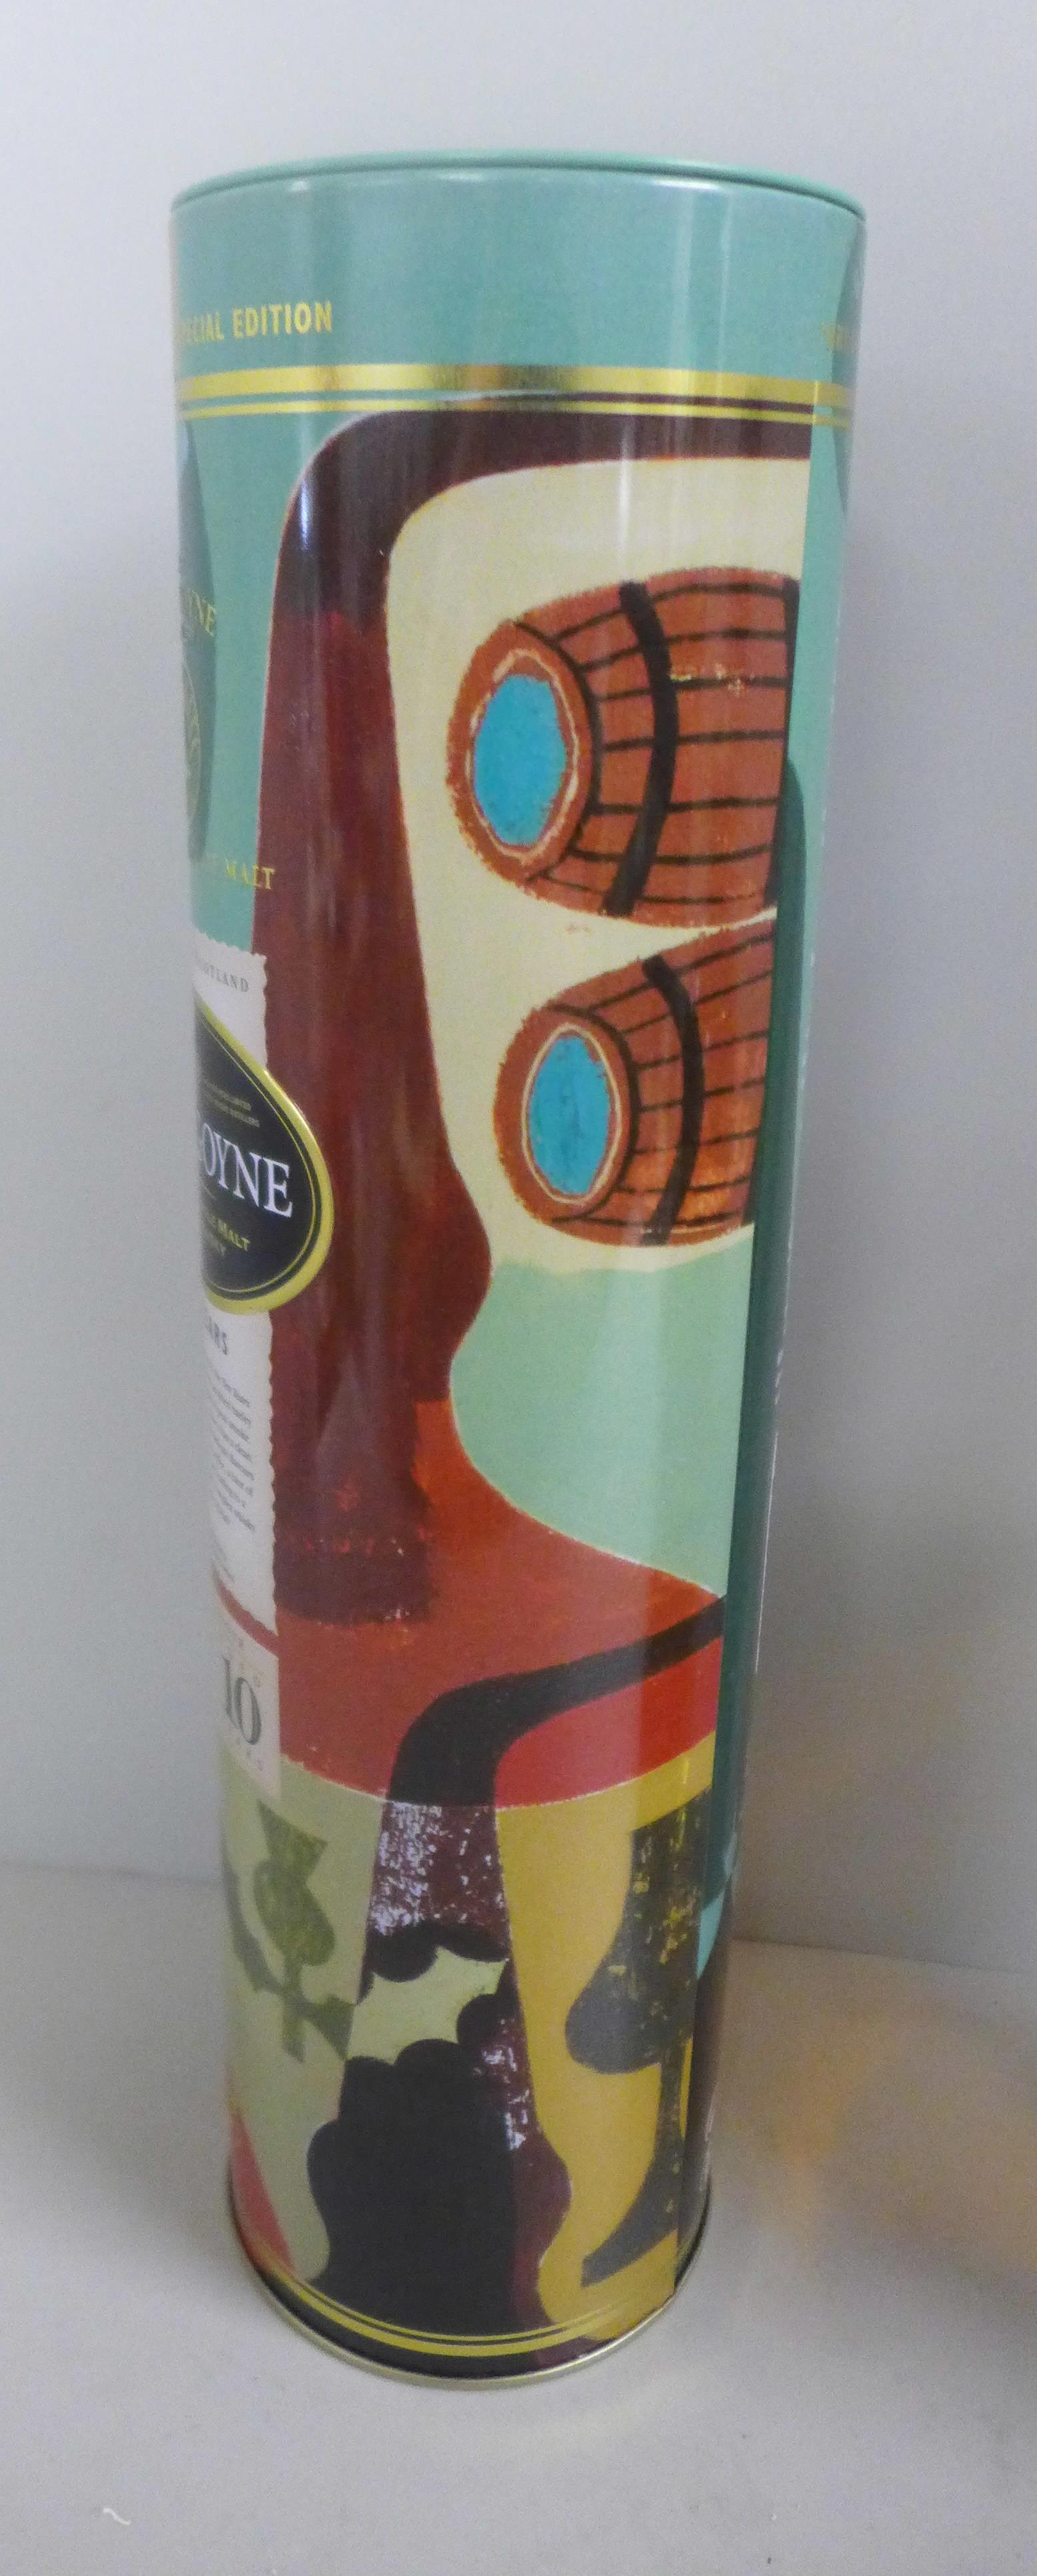 A bottle of Glengoyne Highland Single Malt Scotch Whisky in tin container - Image 4 of 5